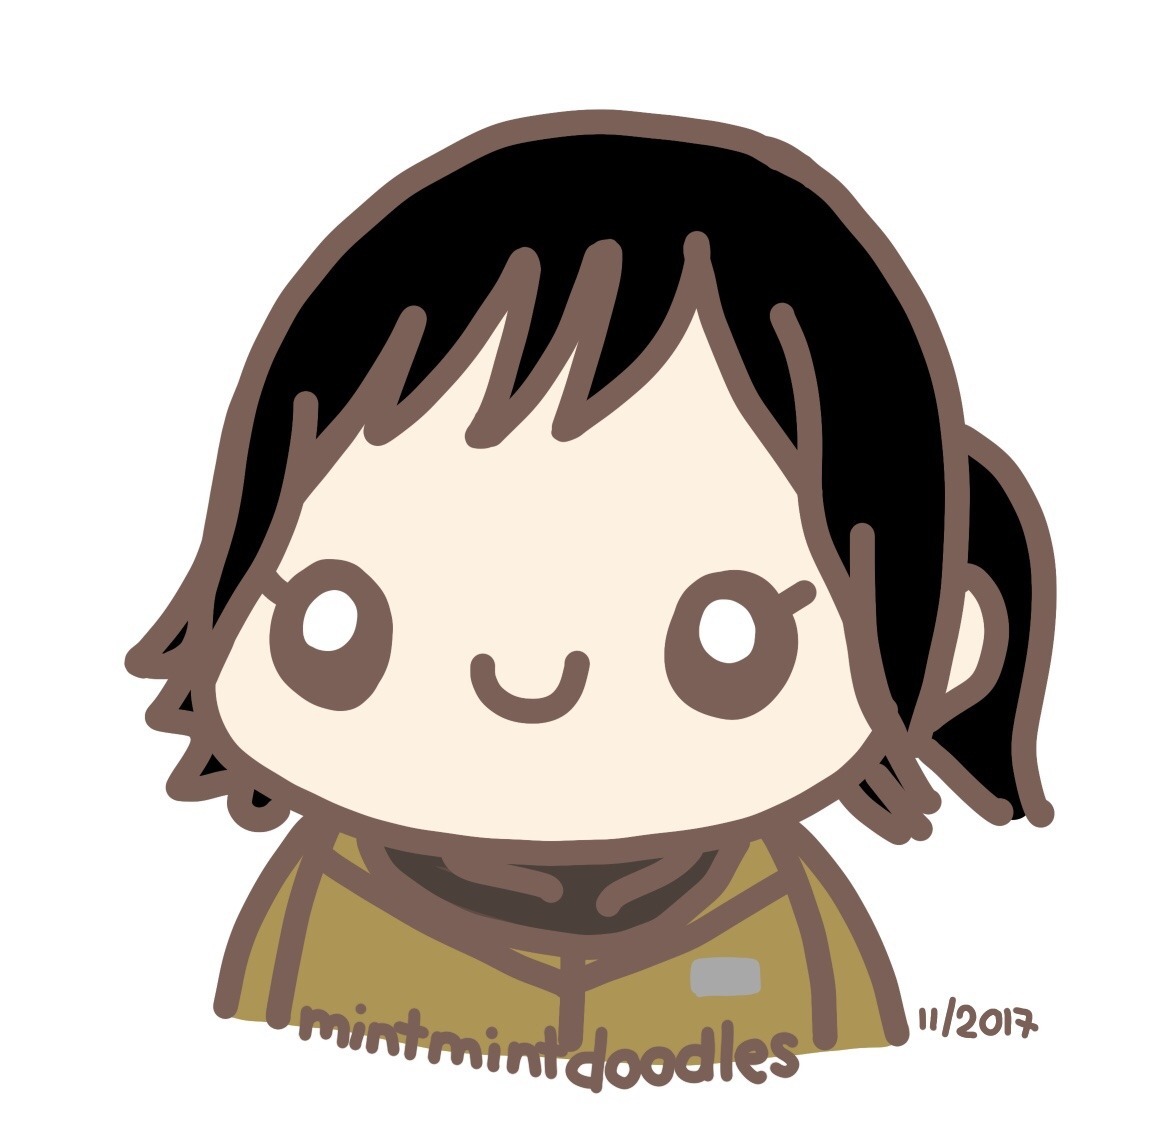 mintmintdoodles:
“ It was an amazing weekend for me. This fan art of Rose Tico was on the fan art wall on the red carpet at Star Wars the Last Jedi premiere on Saturday! Thank you Tumblr and Disney for this opportunity. It is really a dream come true...